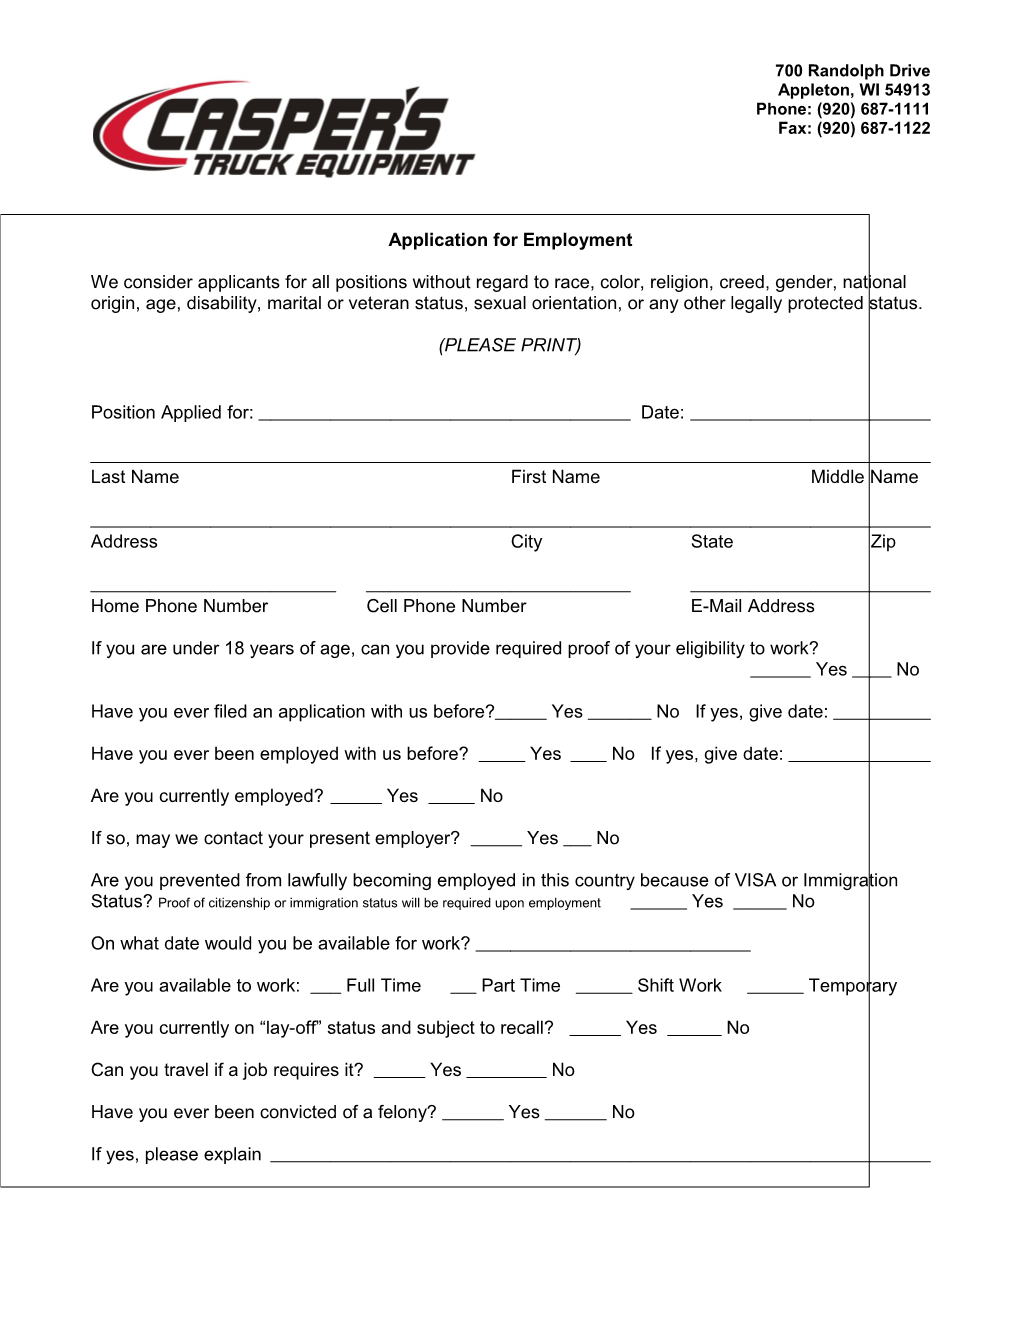 Application for Employment s29